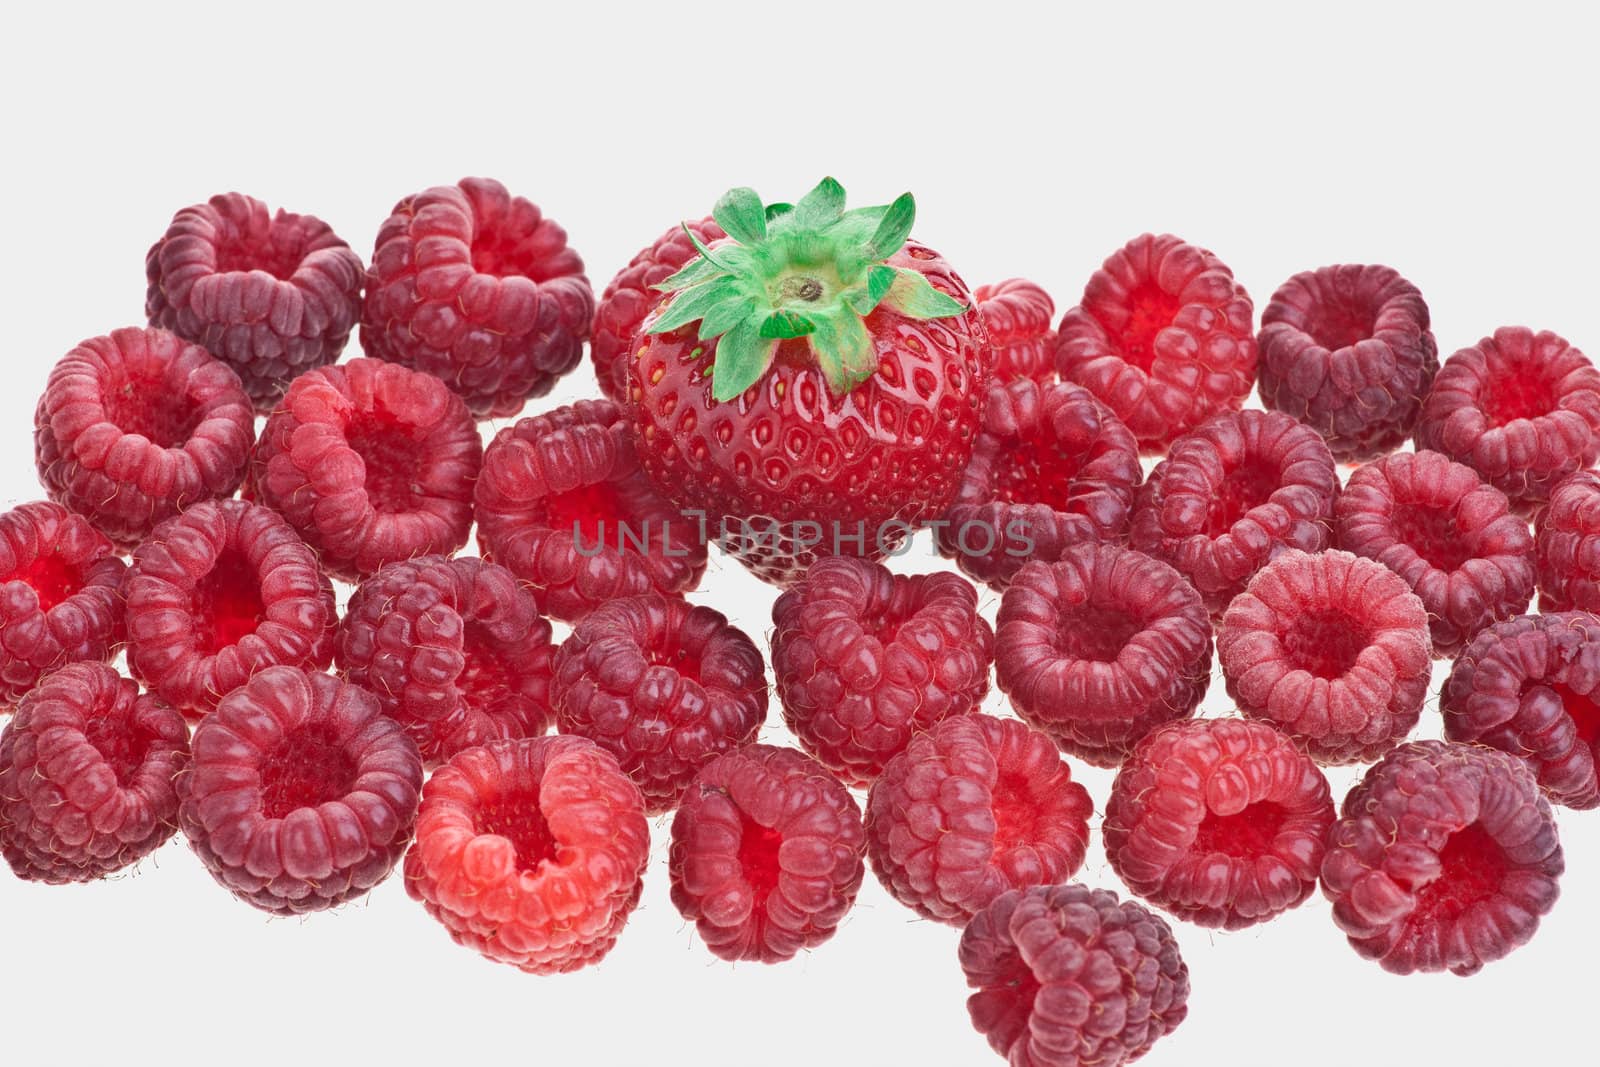 Macro of a strawberry and raspberries against white background 